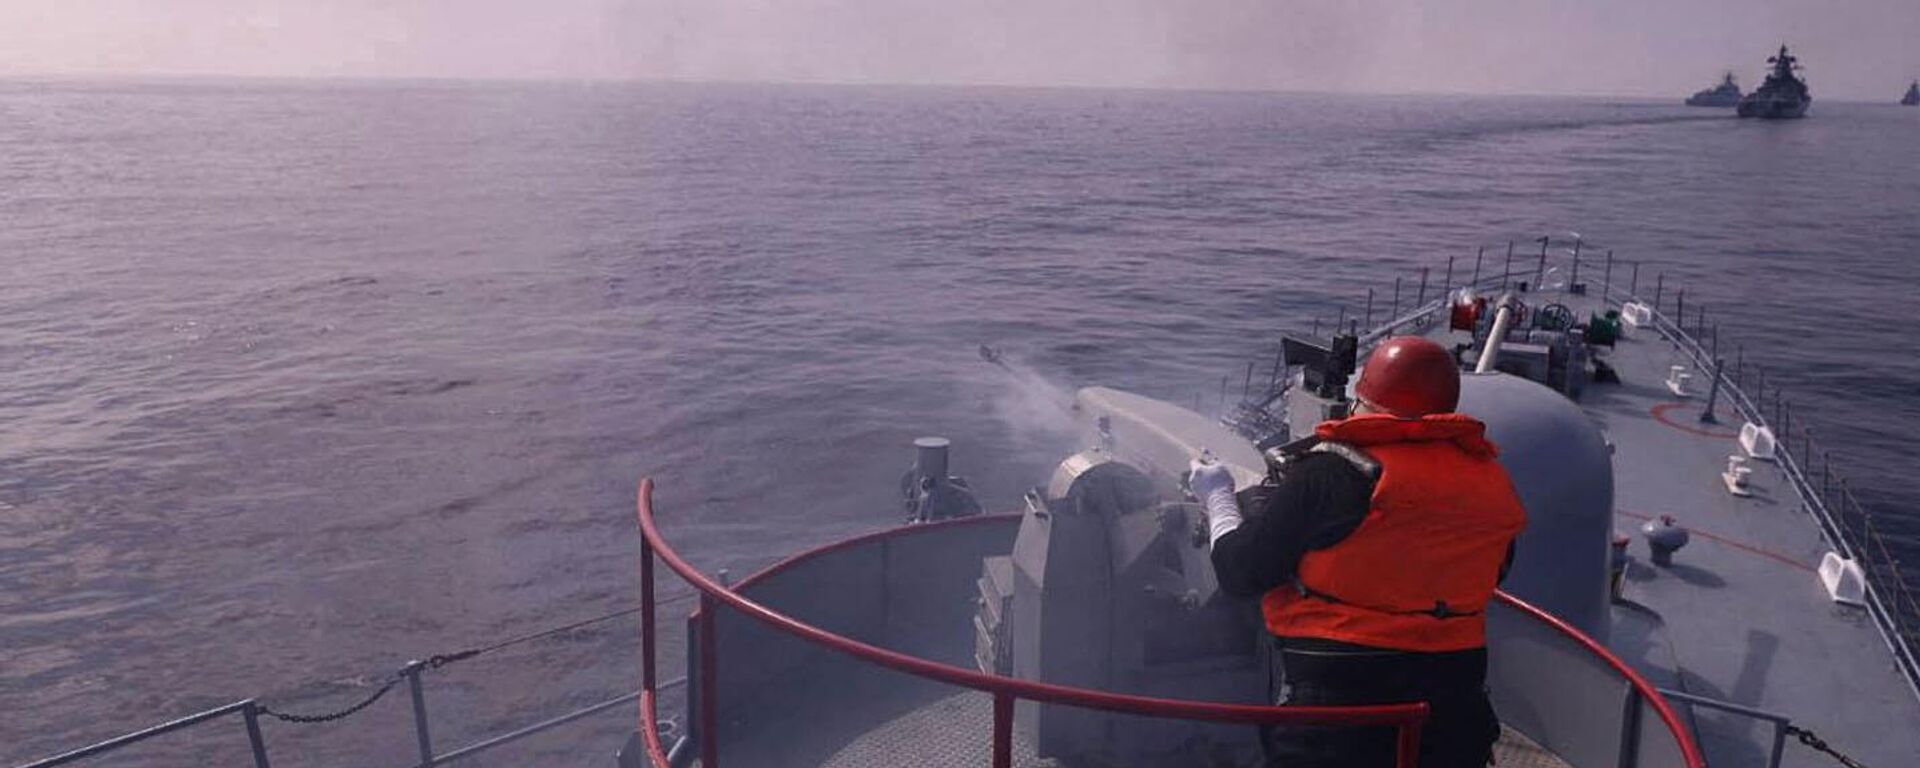 A handout picture made available by the Iranian Army official website on January, 21 2022 shows an navy-man firing atop a warship during a joint military drill in the Indian ocean. - Iran, Russia and China will began today joint naval drills for three days in the Indian Ocean, seeking to reinforce common security, an Iranian naval official said. - Sputnik International, 1920, 29.04.2023